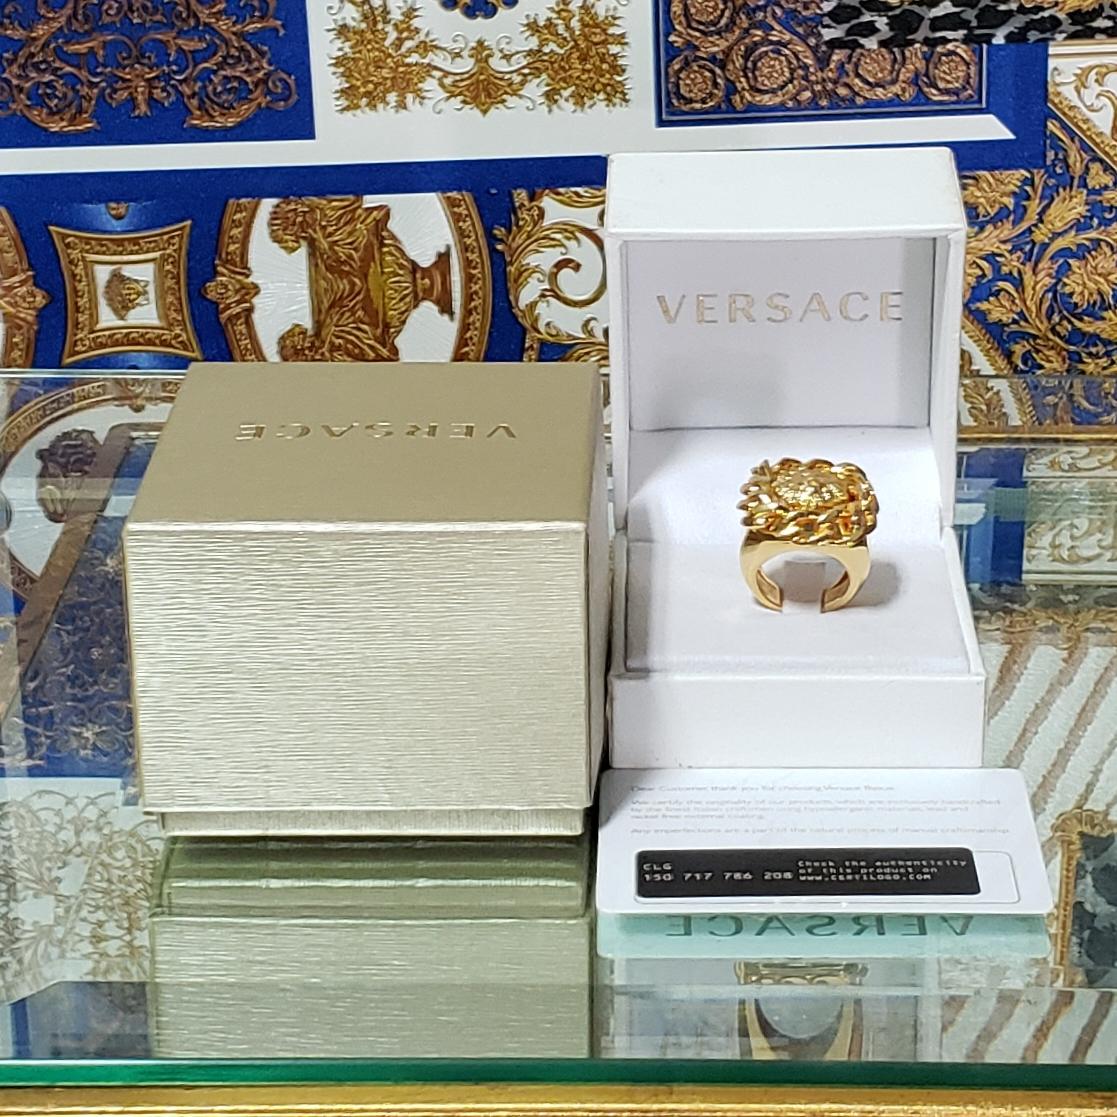  VERSACE


24K Gold Plated Lion Fashion Ring





Made in Italy



Brand new. Display model, got minor scratches.
100% authentic guarantee. Comes with Versace box.

       PLEASE VISIT OUR STORE FOR MORE GREAT ITEMS

